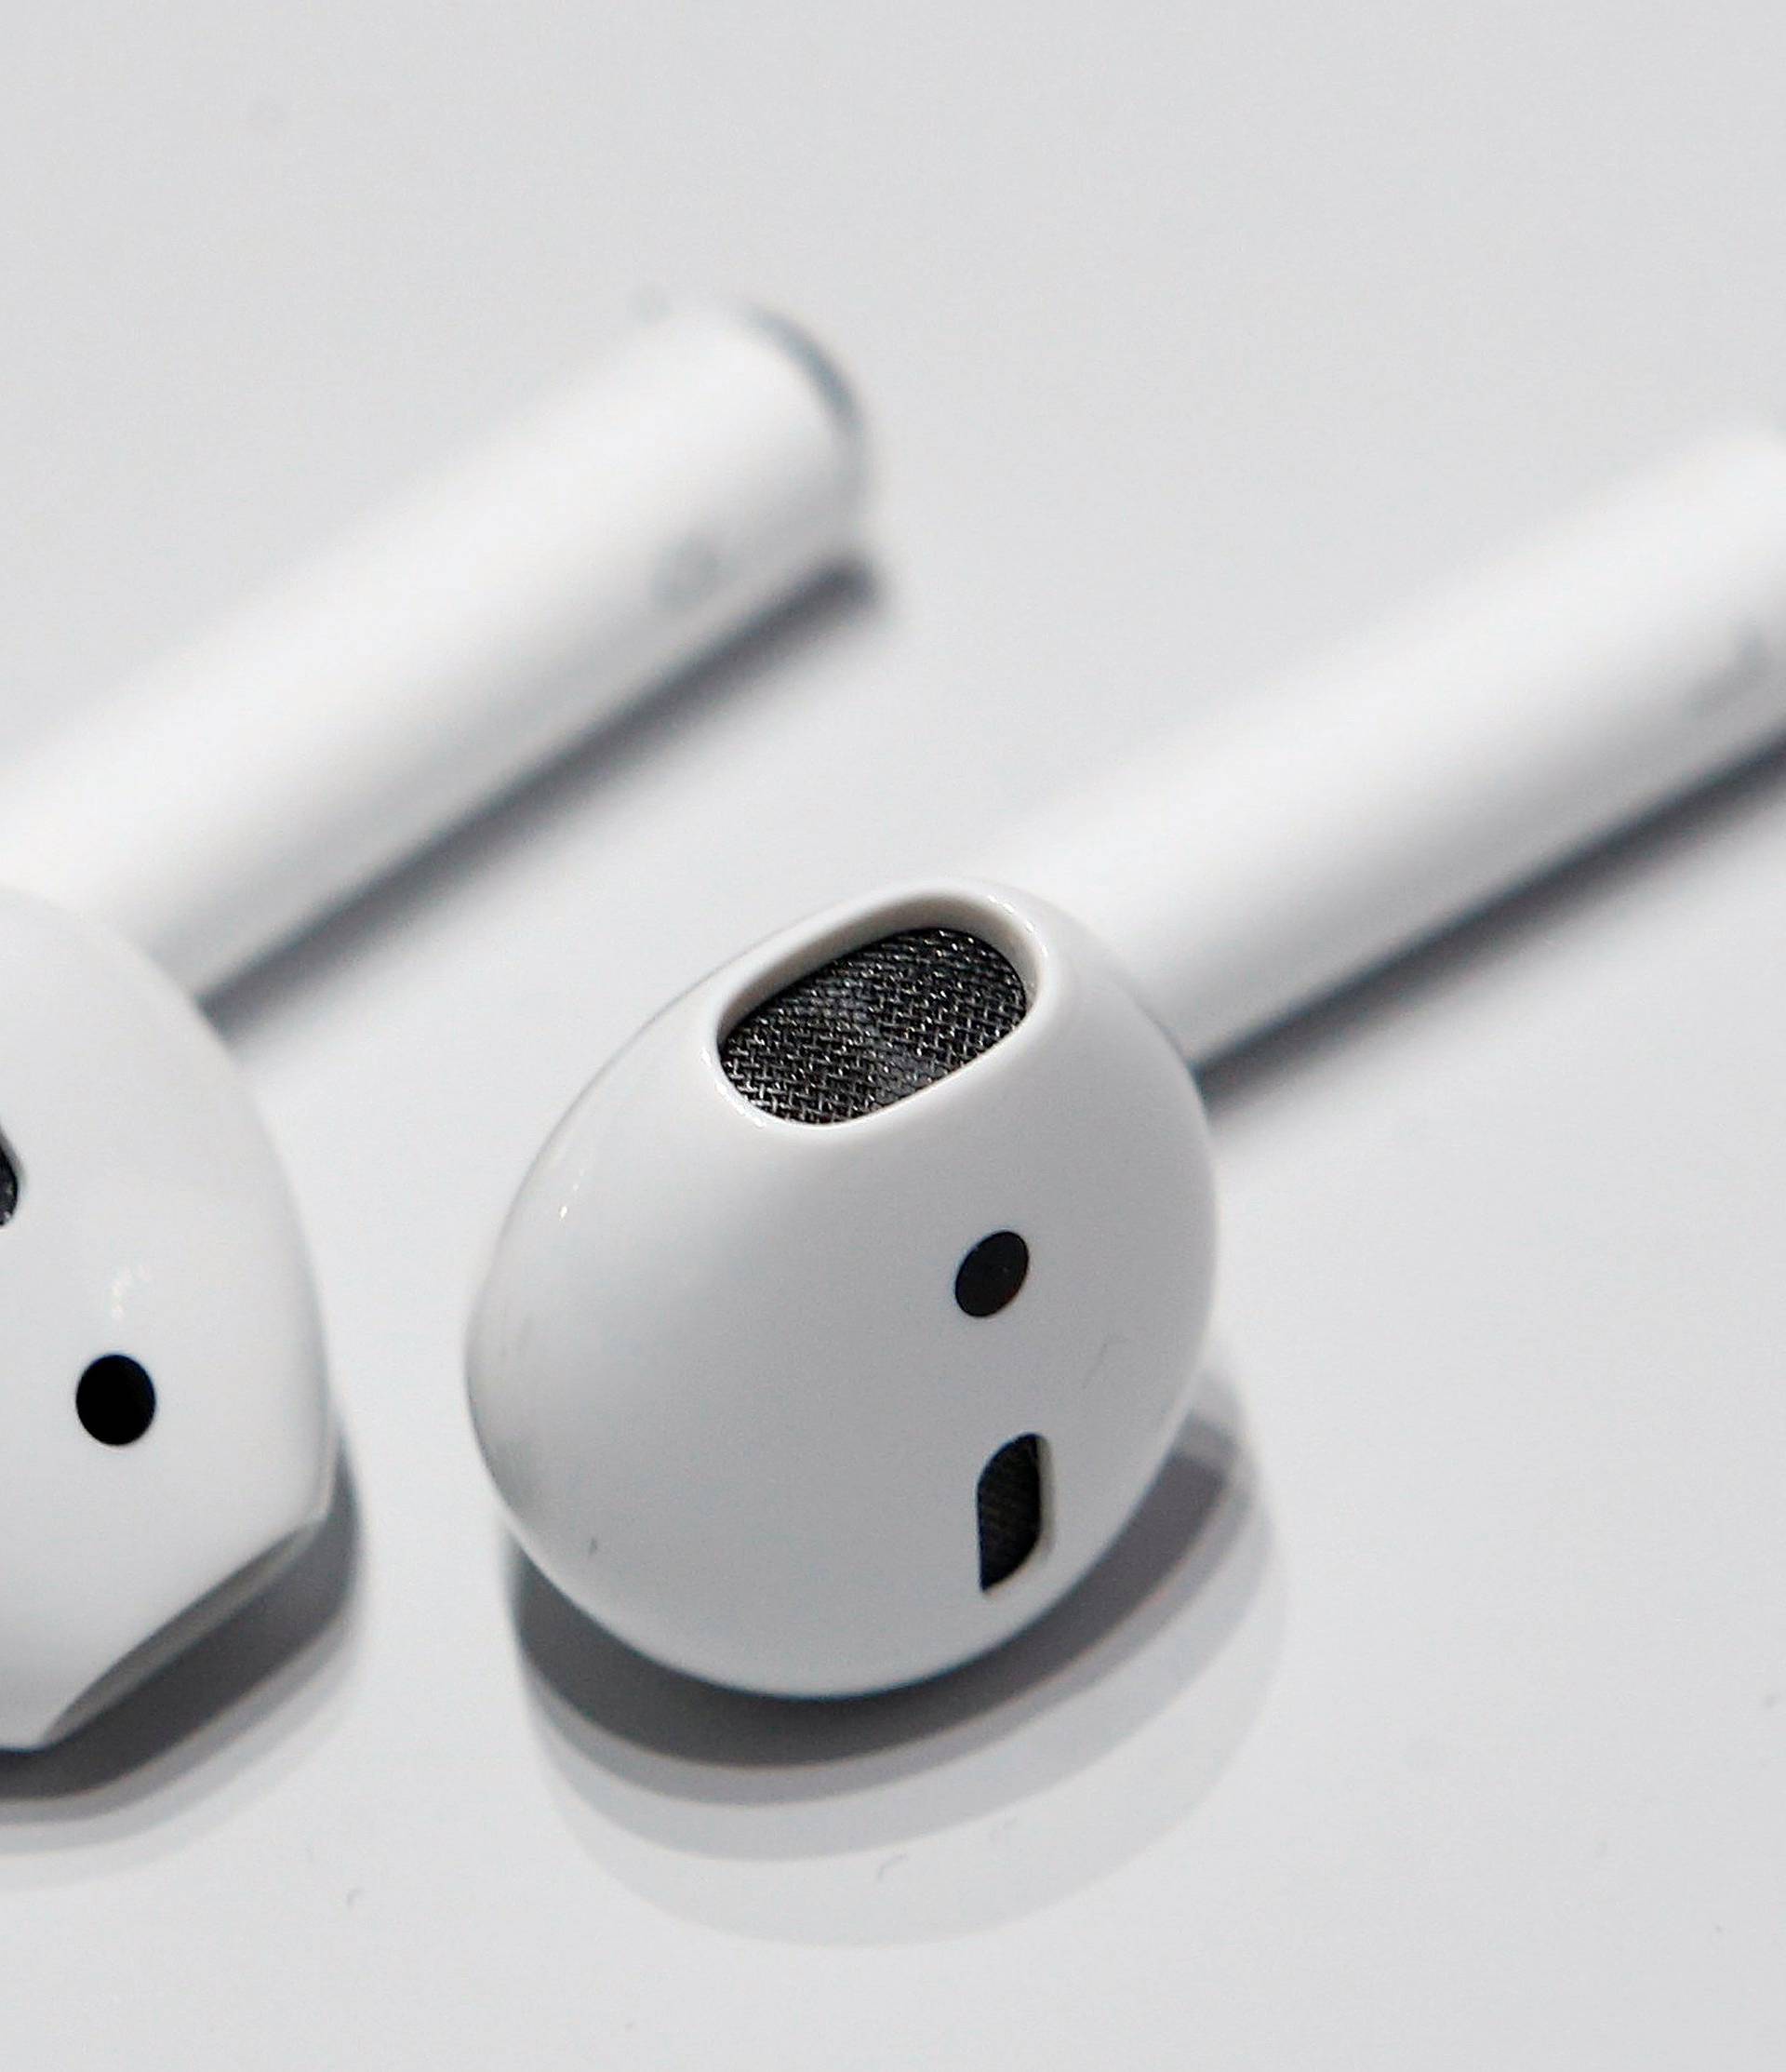 Apple AirPods are displayed during a media event in San Francisco